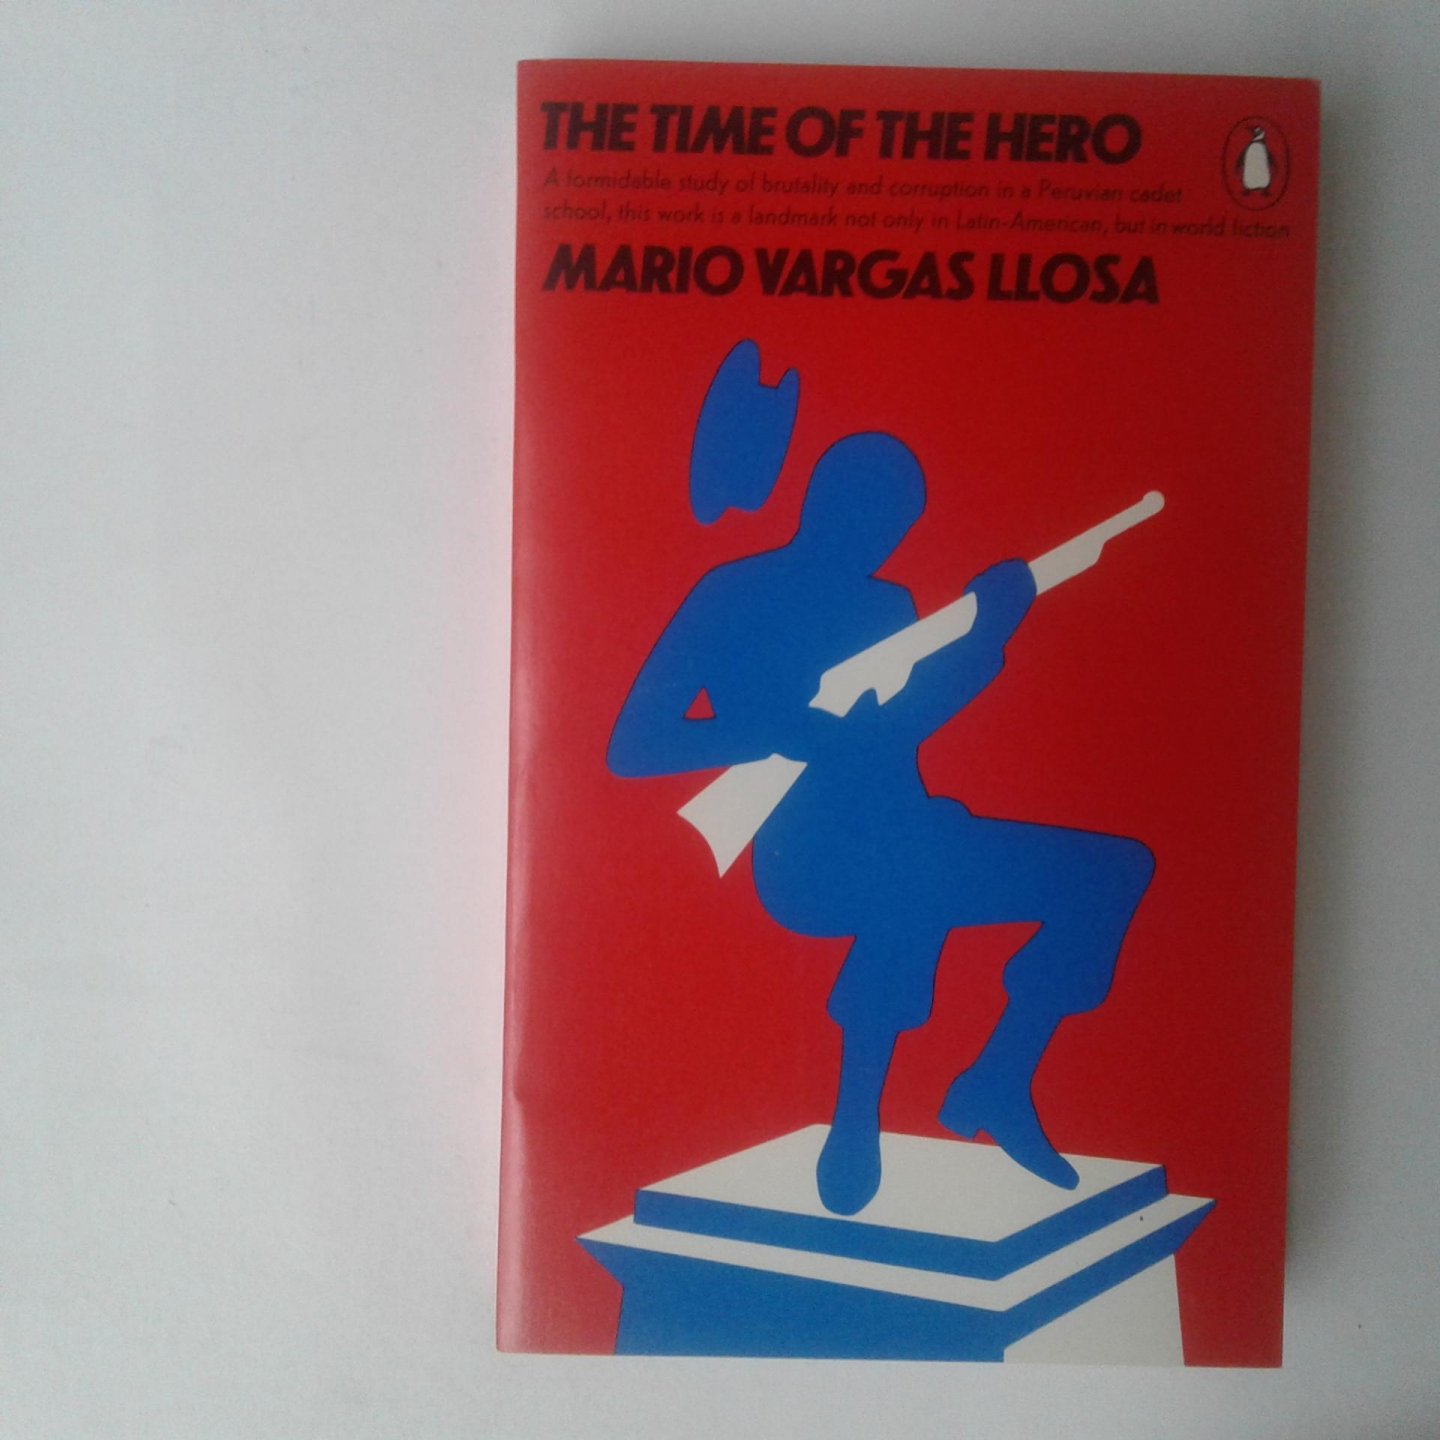 Llosa, Mario Vargas - The Time of the Hero